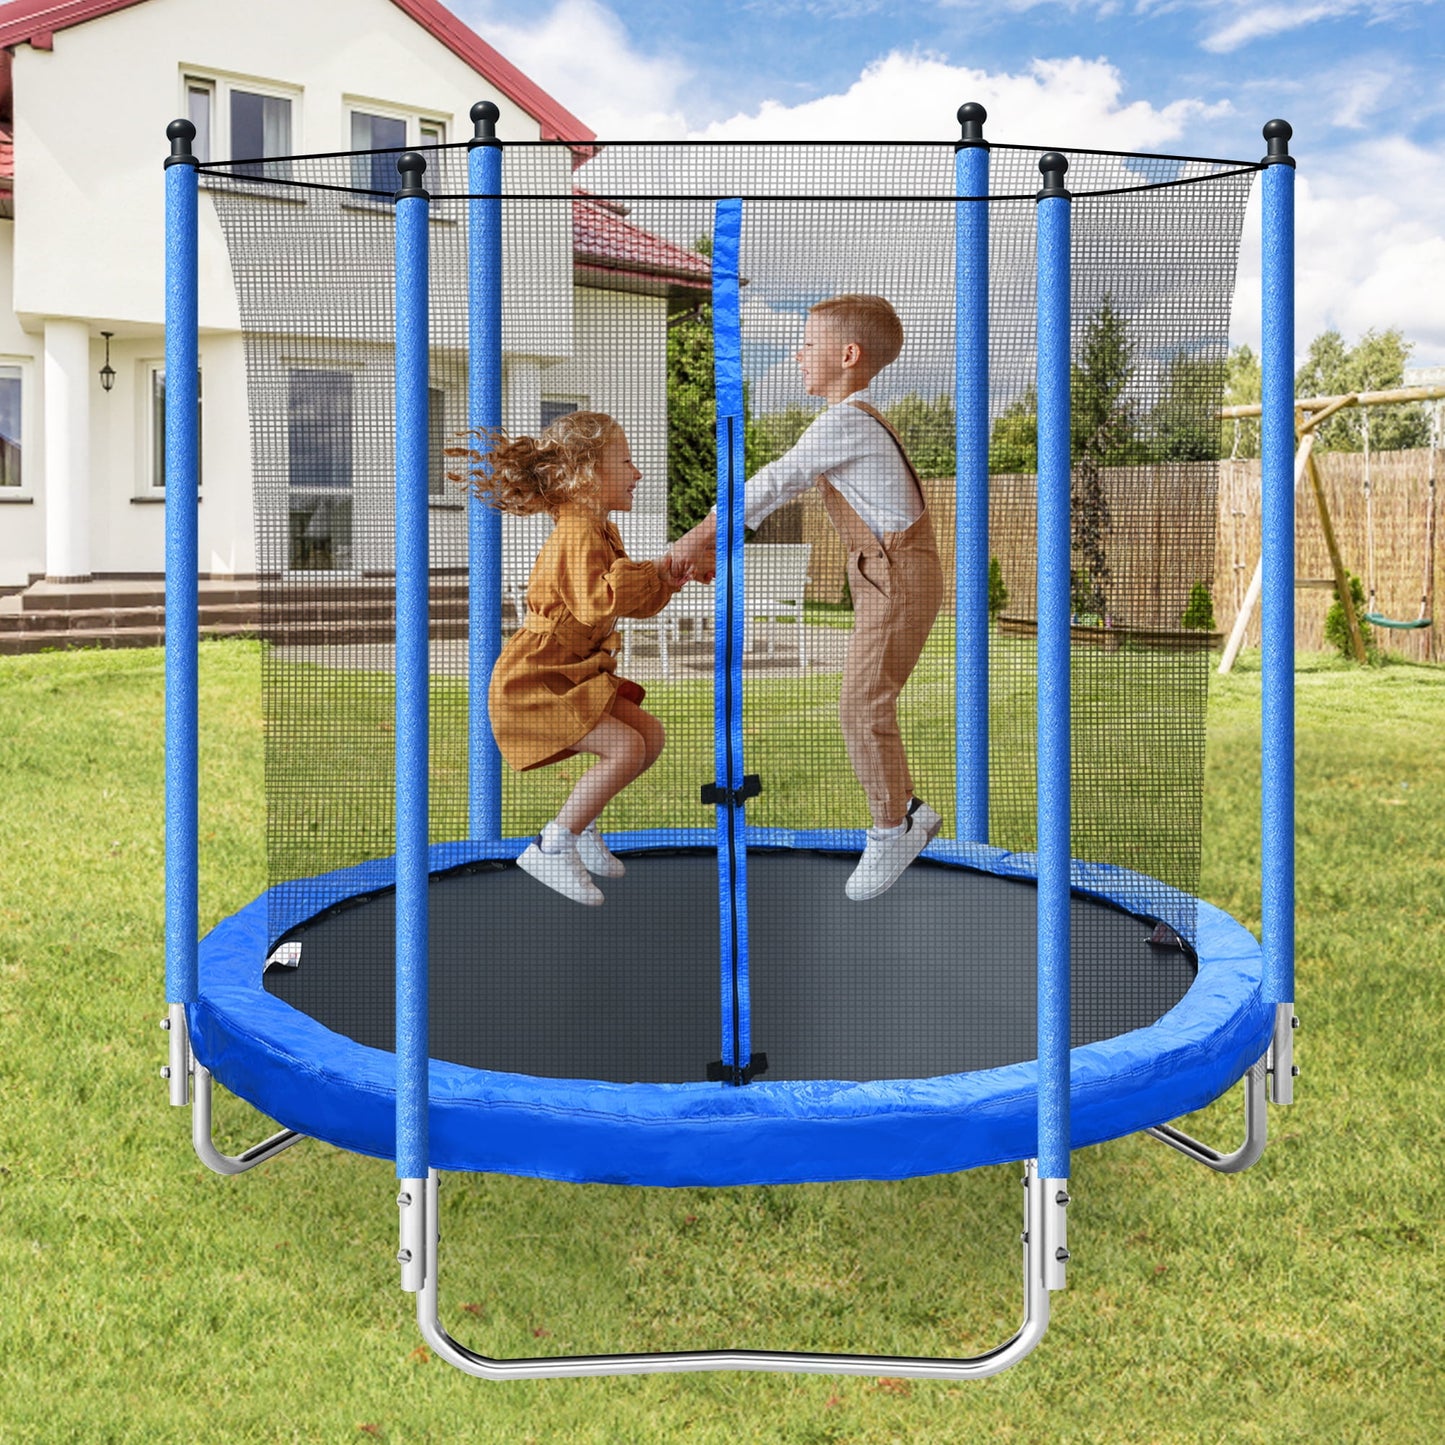 Soges 8FT Trampoline with Safety Enclosure Net for Kids, Trampoline with Jumping Mat and Spring Cover Padding, Trampoline Capacity for 2-3 Kids